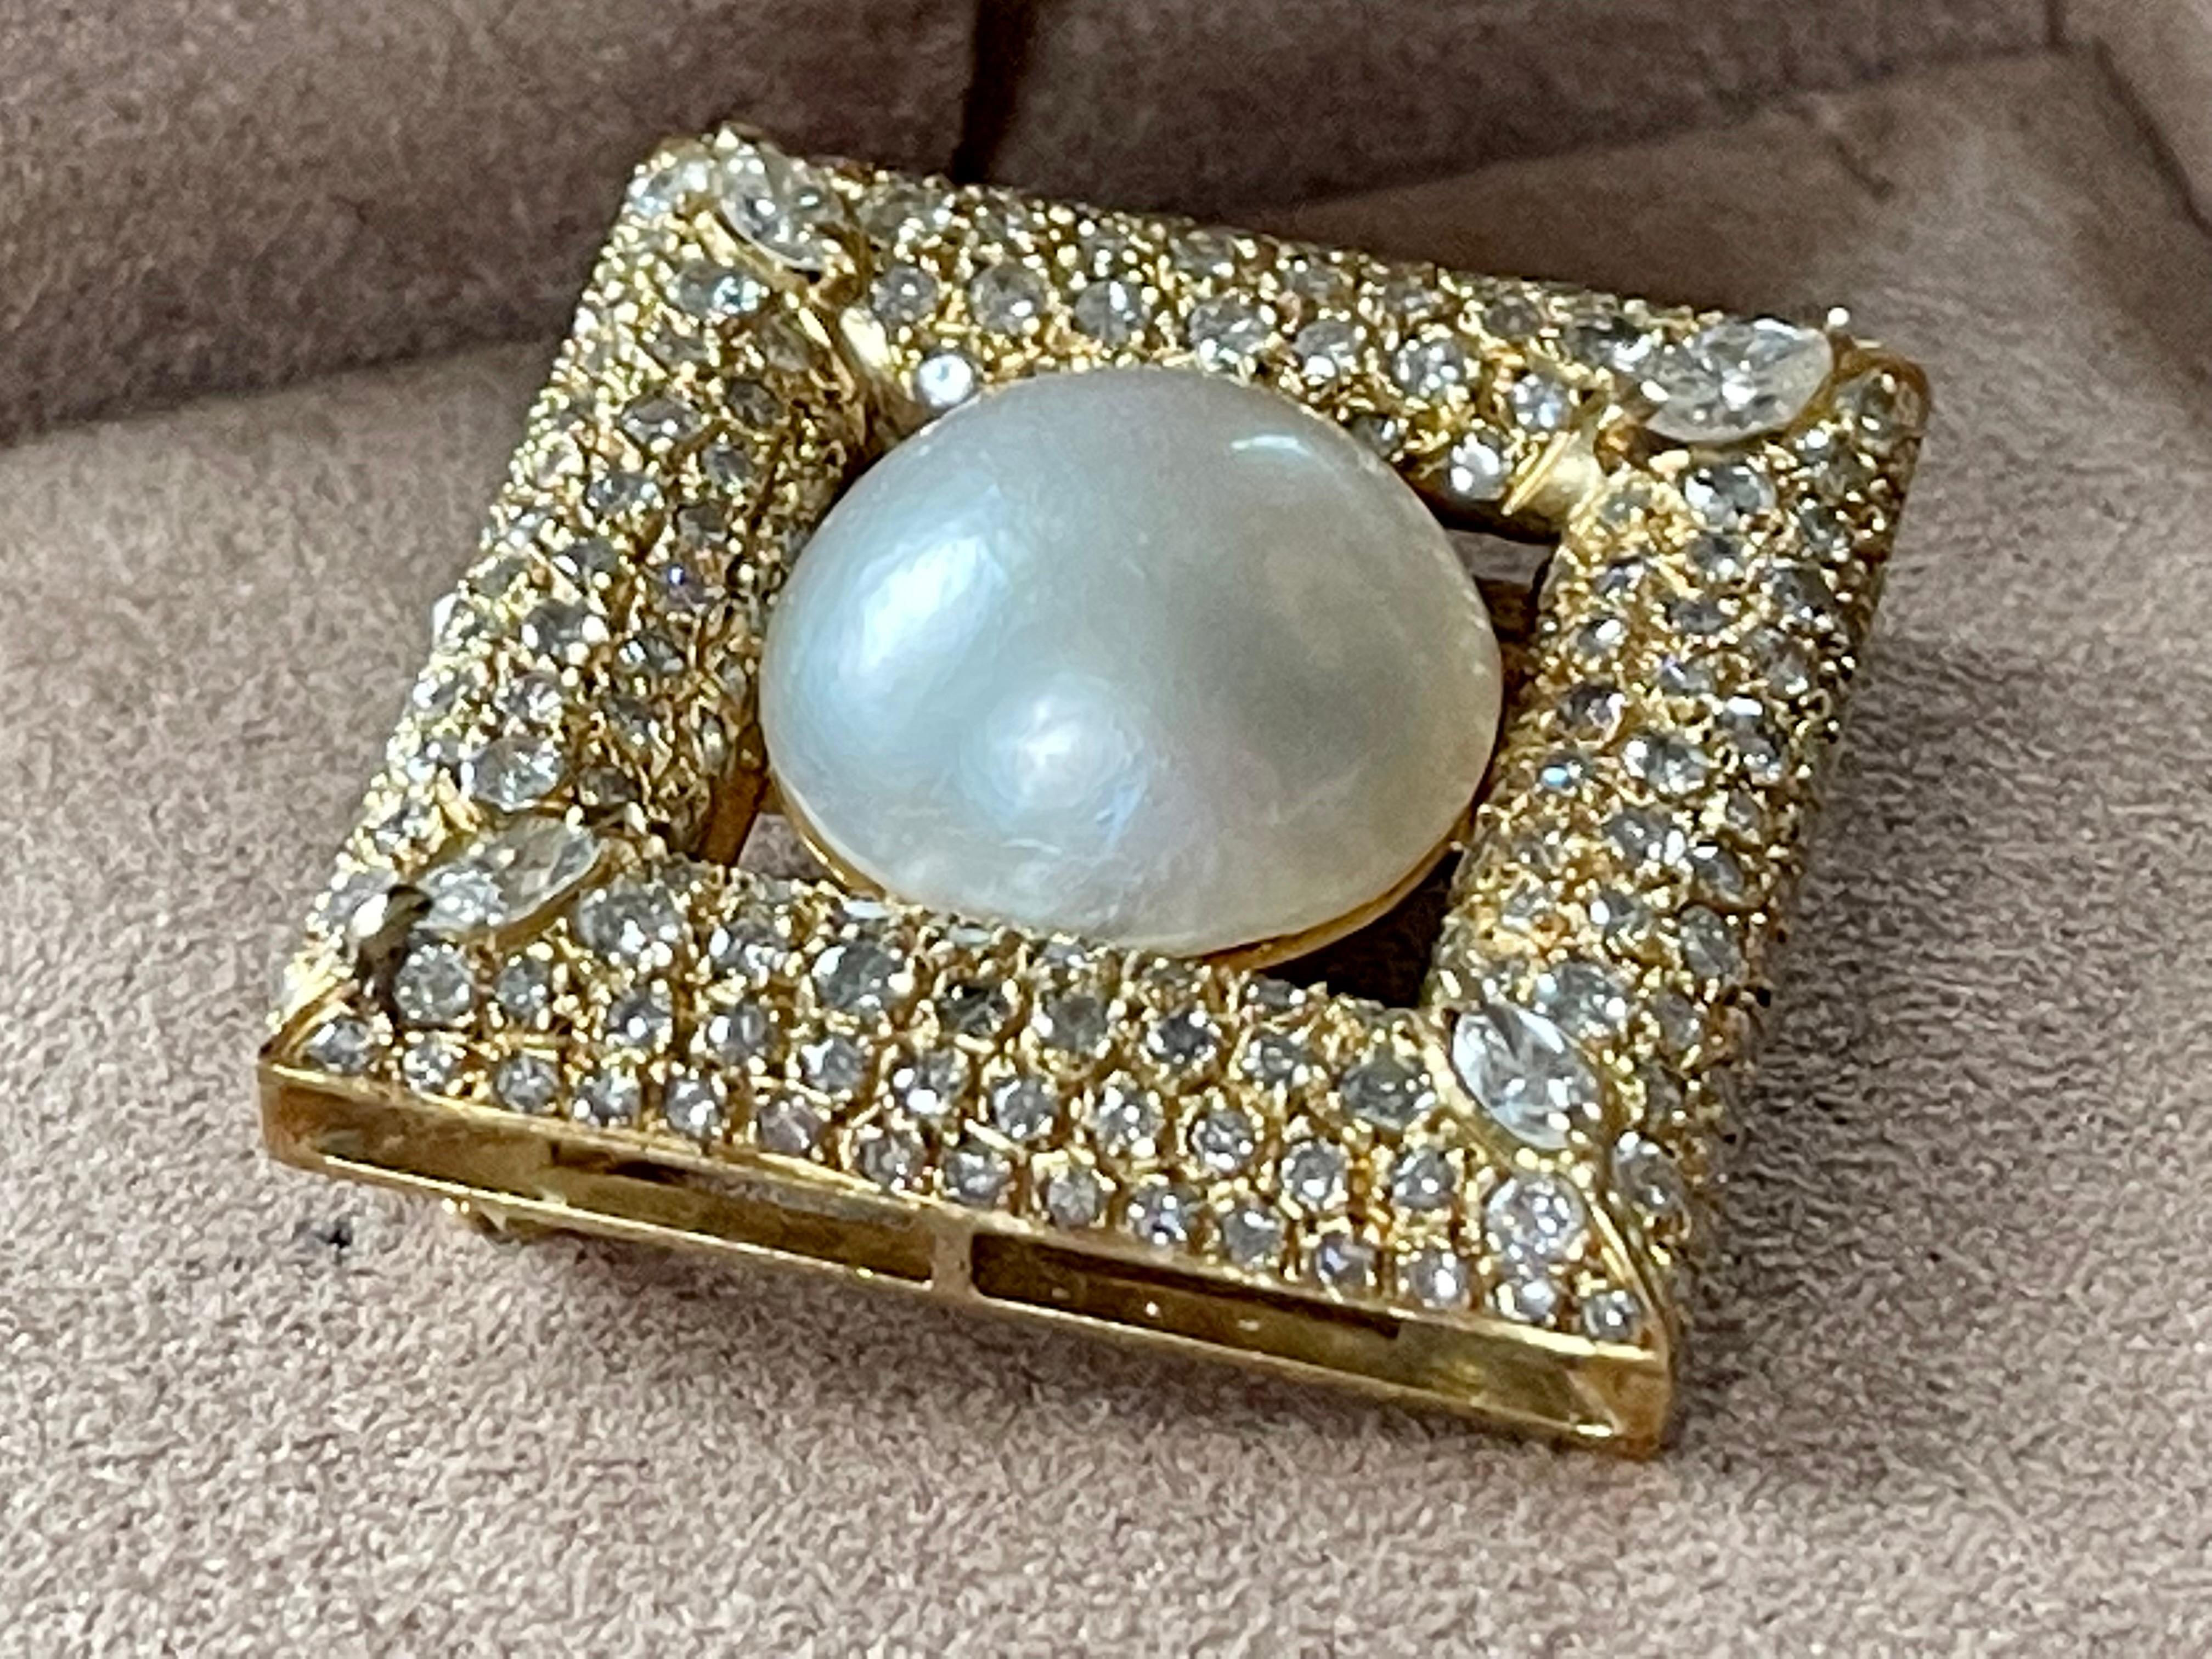 Attractive 18 K yellow Gold brooch set with 1 Mabe Pearl and brilliant cut Diamonds and 4 Marquise Diamonds with a total weight of approximately 4.50 ct, I color, si clarity.
The brooch measures 3.4 cm x 3.4 cm and weighs 26.84 grams. Matching